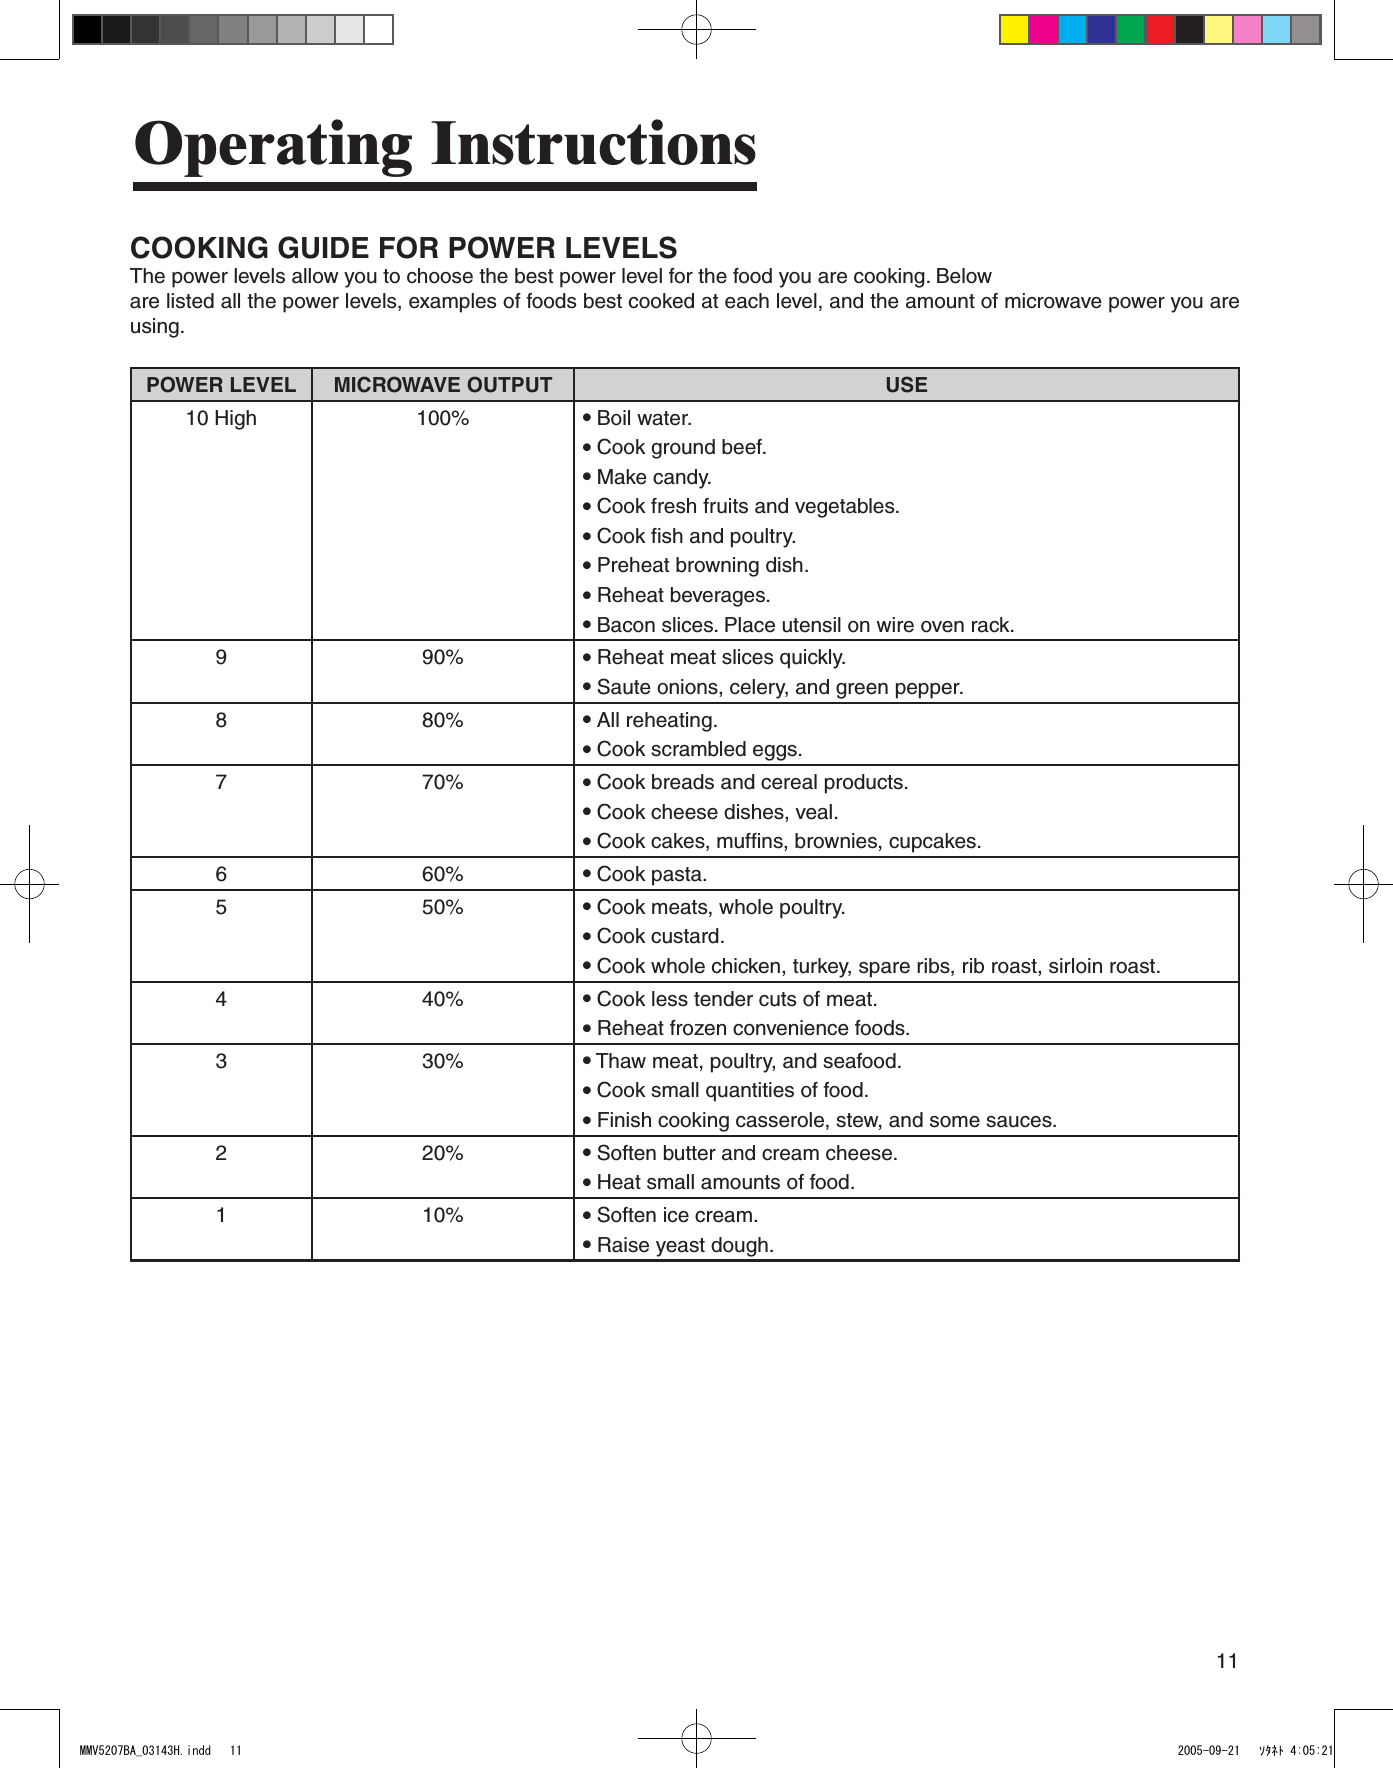 11Operating InstructionsCOOKING GUIDE FOR POWER LEVELSThe power levels allow you to choose the best power level for the food you are cooking. Beloware listed all the power levels, examples of foods best cooked at each level, and the amount of microwave power you are using.POWER LEVEL  MICROWAVE OUTPUT  USE10 High  100%  ● Boil water.● Cook ground beef.● Make candy.● Cook fresh fruits and vegetables.● Cook fish and poultry.● Preheat browning dish.● Reheat beverages.● Bacon slices. Place utensil on wire oven rack.9  90%  ● Reheat meat slices quickly.● Saute onions, celery, and green pepper.8  80%  ● All reheating.● Cook scrambled eggs.7  70%  ● Cook breads and cereal products.● Cook cheese dishes, veal.● Cook cakes, muffins, brownies, cupcakes.6  60%  ● Cook pasta.5  50%  ● Cook meats, whole poultry.● Cook custard.● Cook whole chicken, turkey, spare ribs, rib roast, sirloin roast.4  40%  ● Cook less tender cuts of meat.● Reheat frozen convenience foods.3  30%  ● Thaw meat, poultry, and seafood.● Cook small quantities of food.● Finish cooking casserole, stew, and some sauces.2  20%  ● Soften butter and cream cheese.● Heat small amounts of food.1  10%  ● Soften ice cream.● Raise yeast dough.MMV5207BA_03143H.indd   11 2005-09-21   ｿﾀﾈﾄ 4:05:21